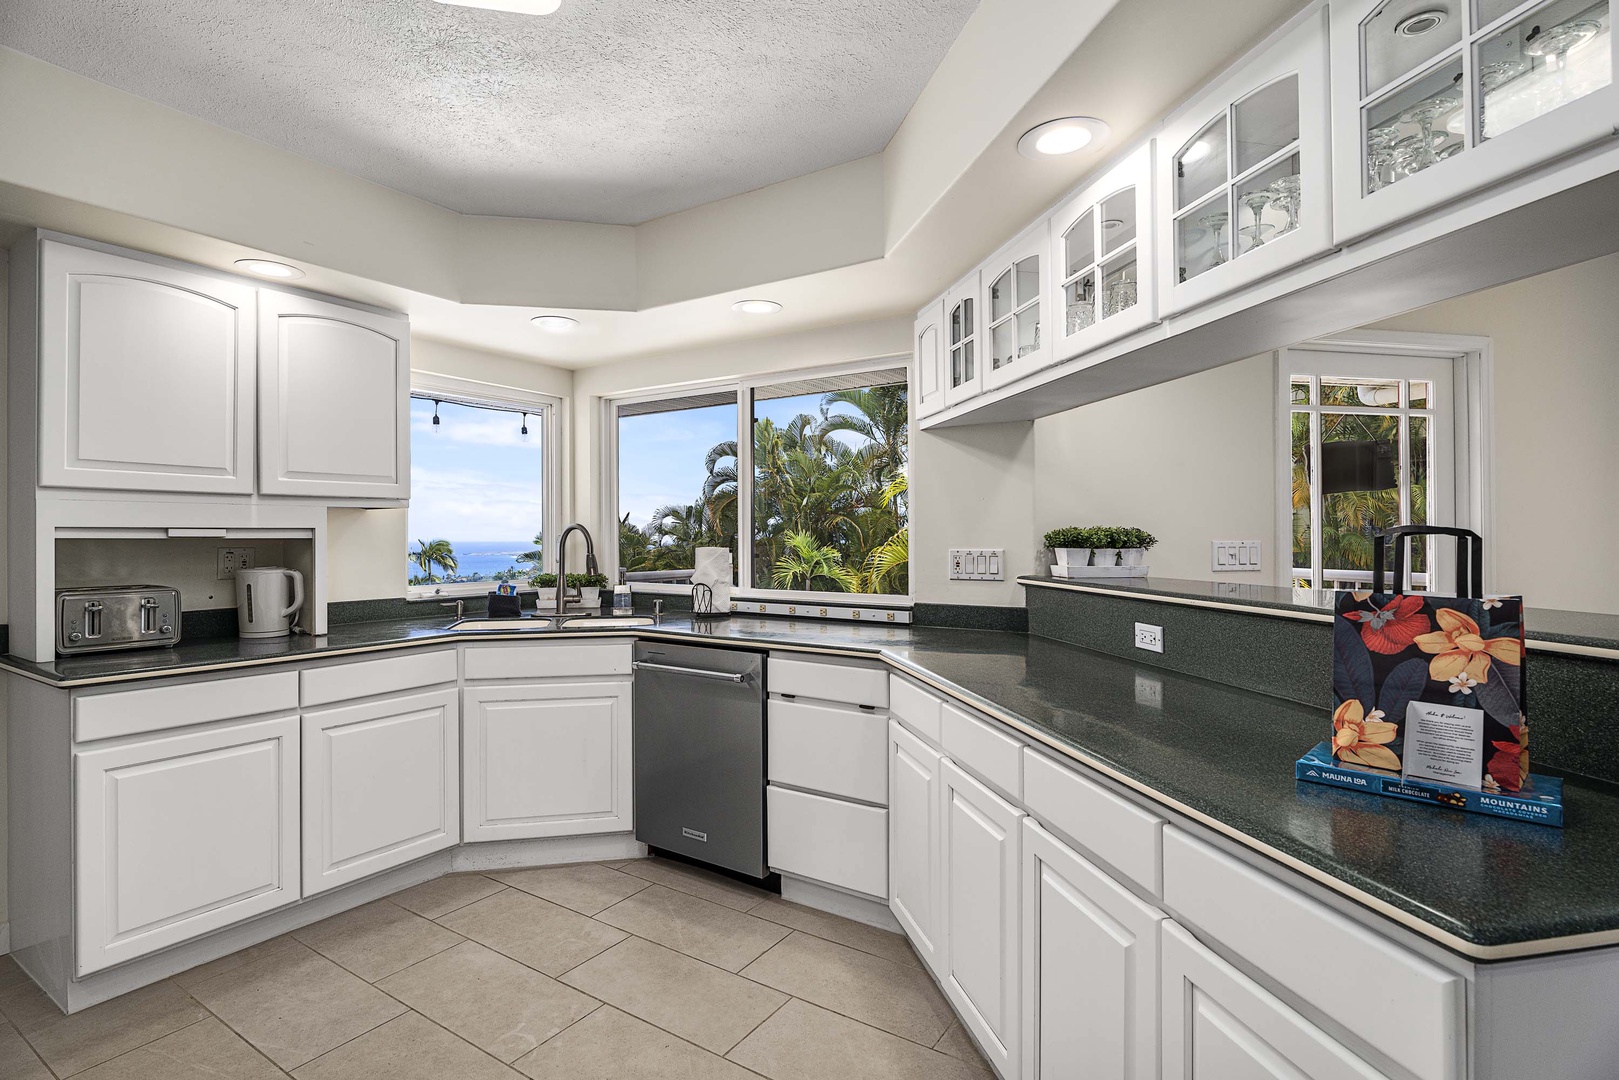 Kailua-Kona Vacation Rentals, Honu Hale - Upgraded kitchen with stainless appliances and an Ocean view!~